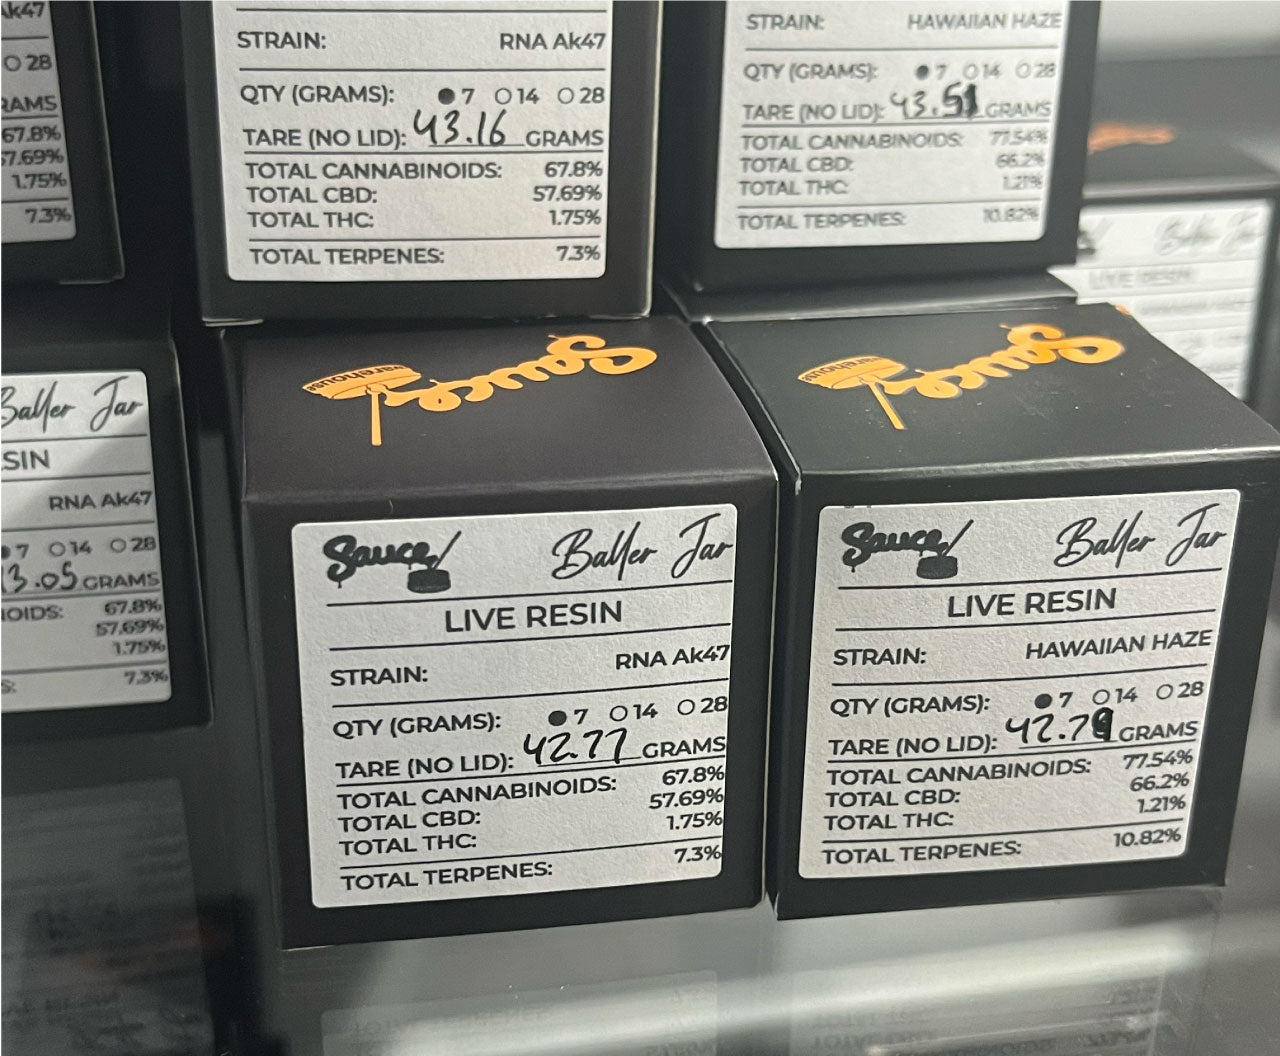 Image of Sauce Warehouse Baller Jar Box label showing cannabinoid and terpene content.